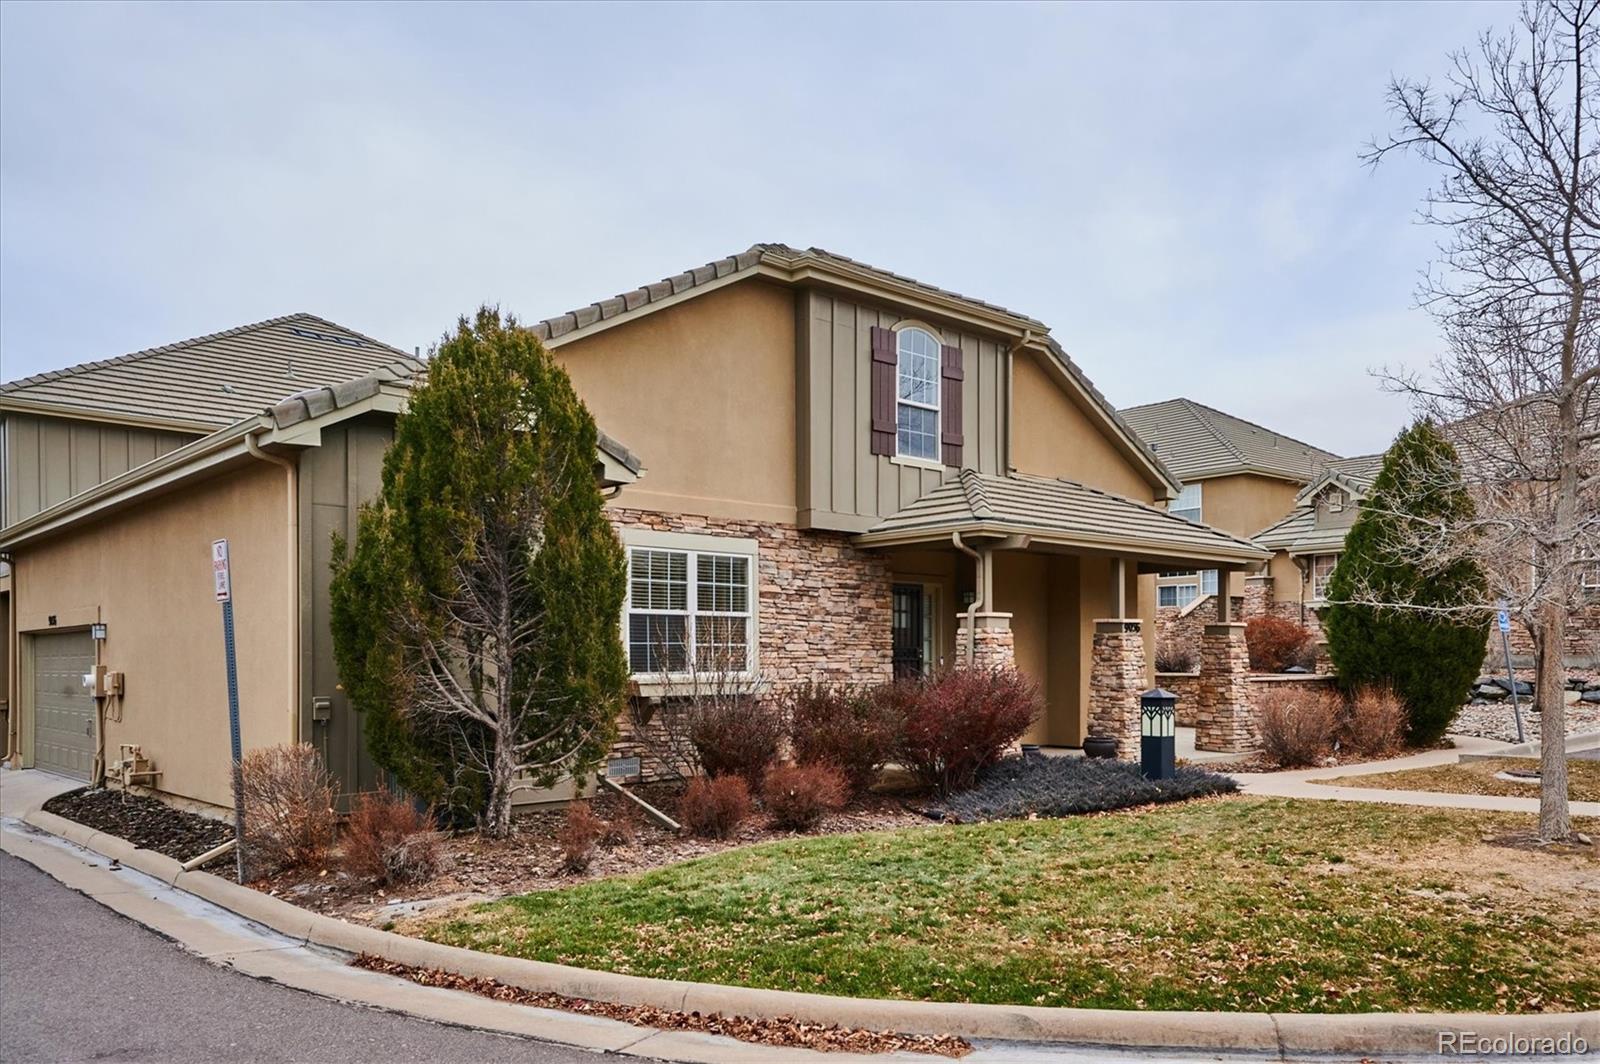 Report Image for 9056  Old Tom Morris Circle,Highlands Ranch, Colorado